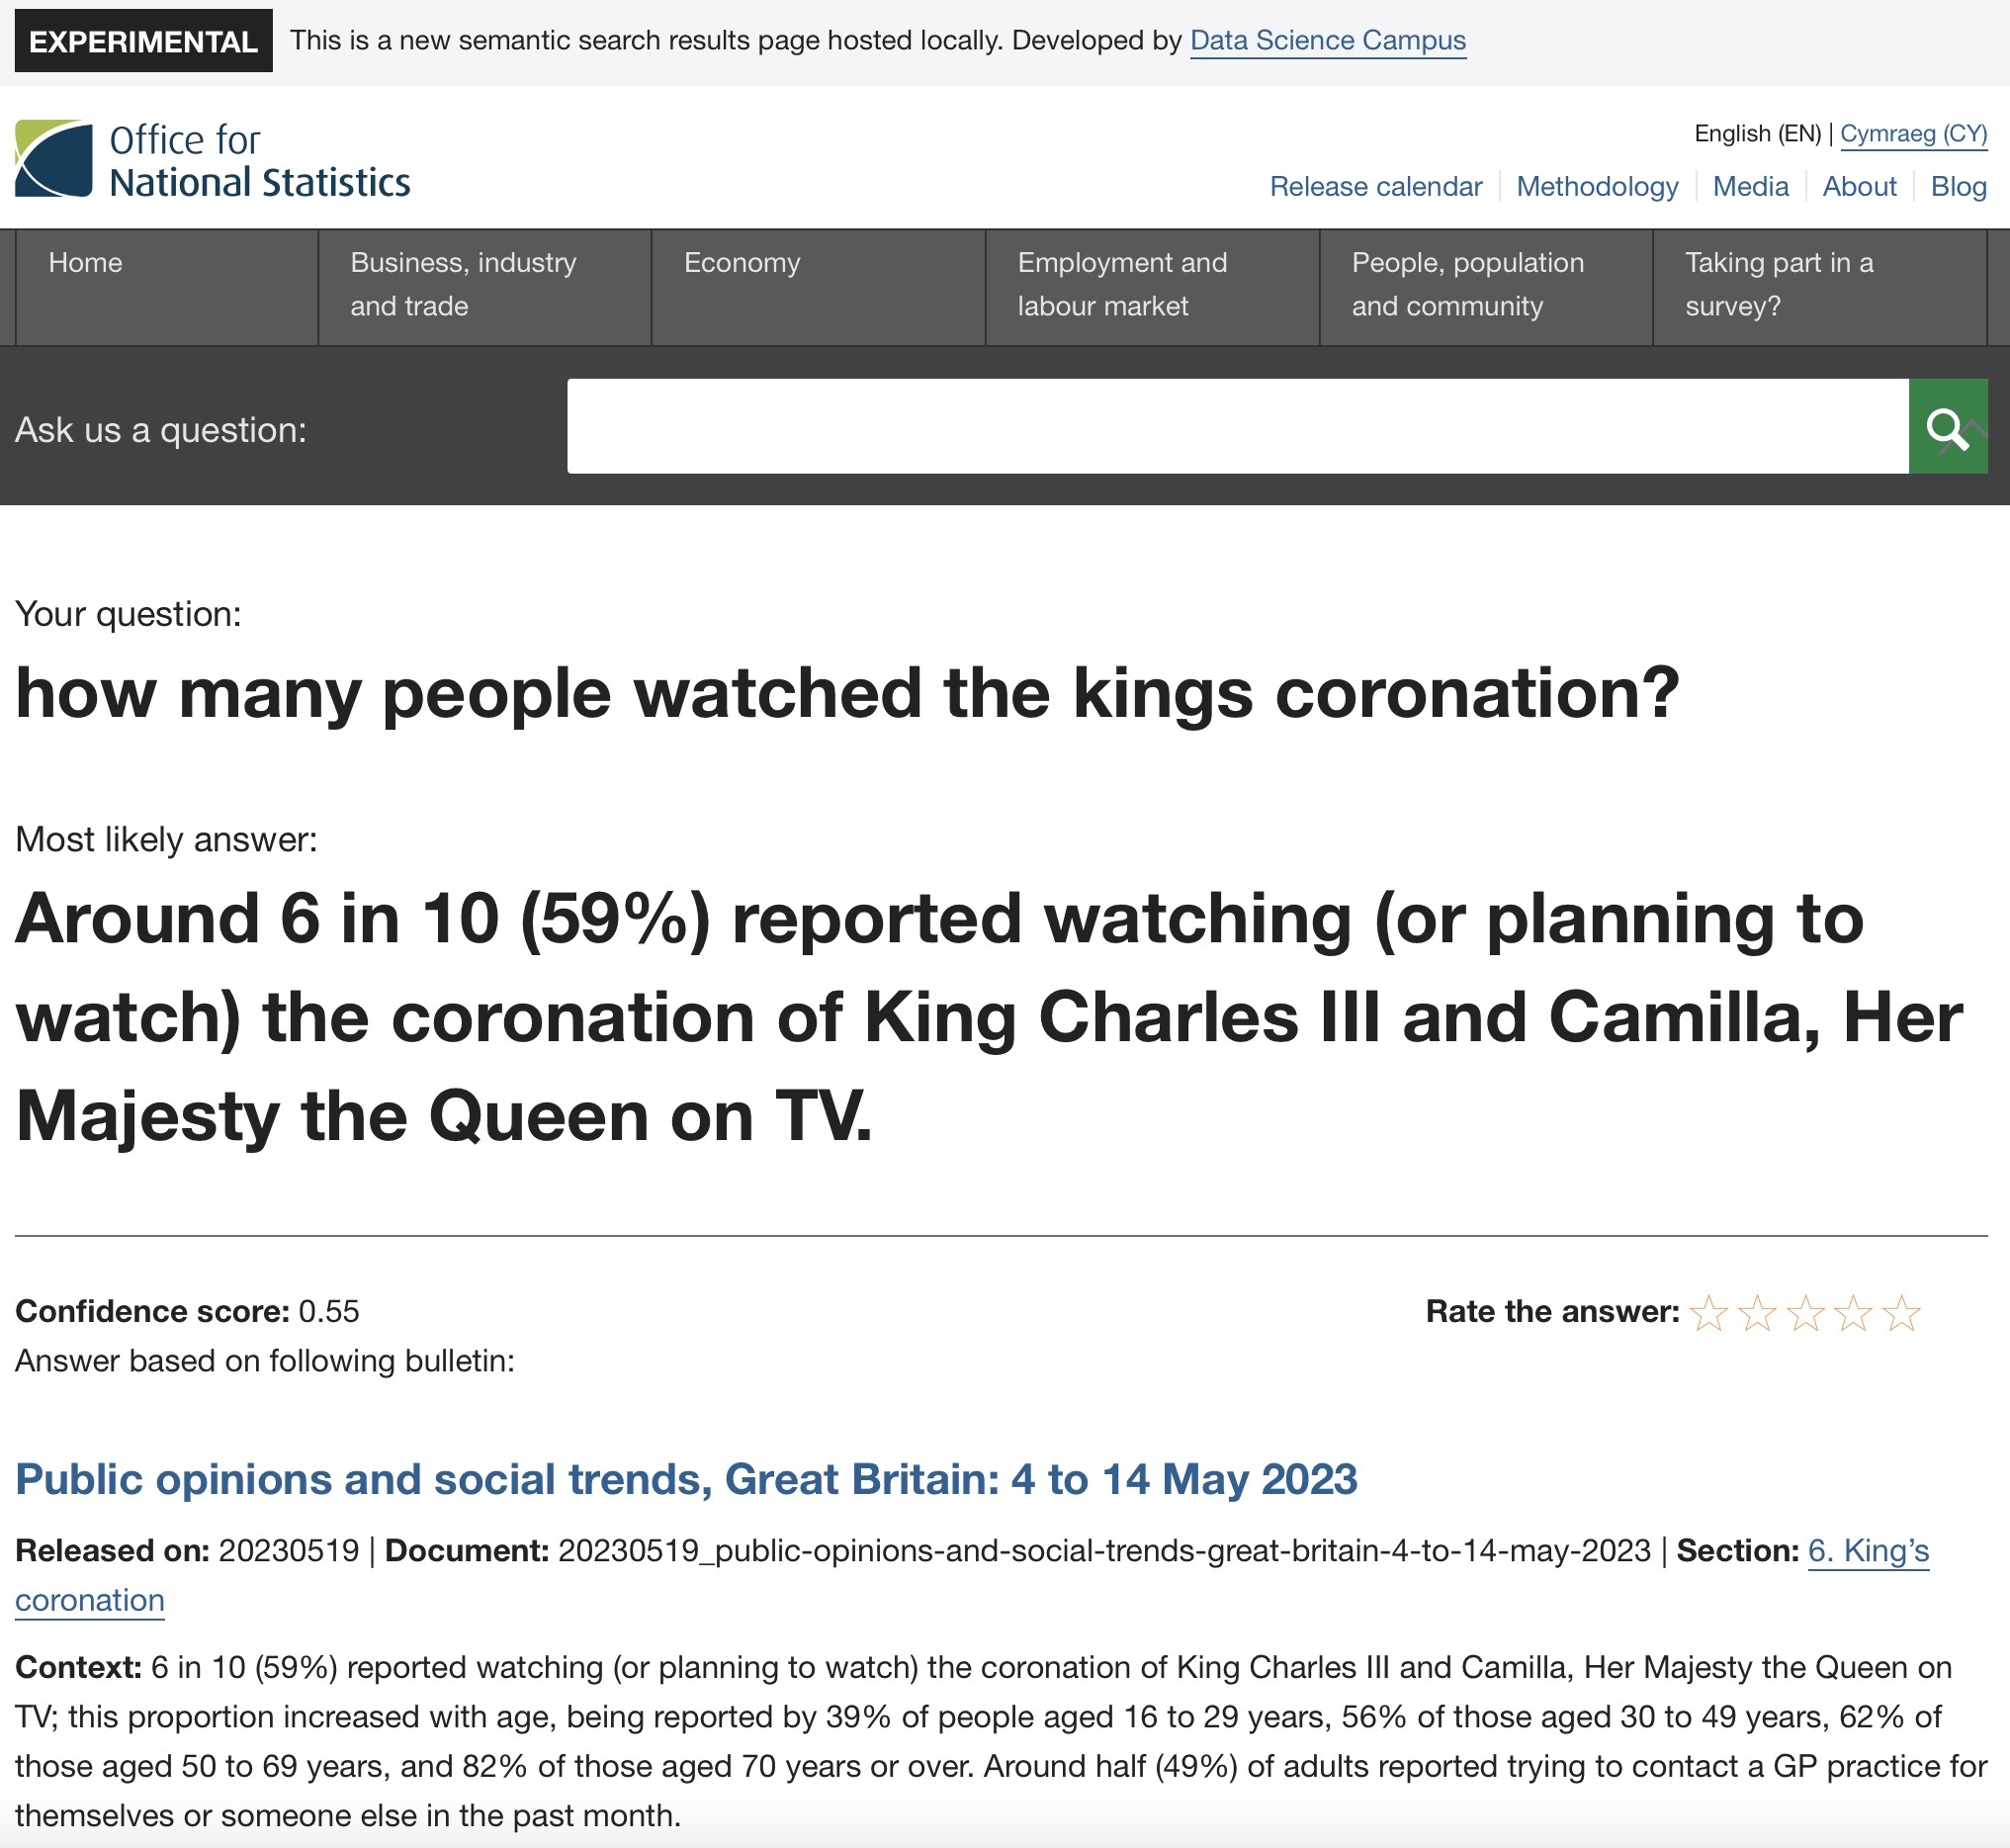 Figure 2: search results from the new tool for the question ‘how many people watched the Kings Coronation?’ The new search tool returns the text ‘Around 6 in 10 (59%) reported watching (or planning to watch) the coronation of King Charles III and Camilla, Her Majesty the Queen on TV. The new tool also returns the relevant bulletin that this text is held.